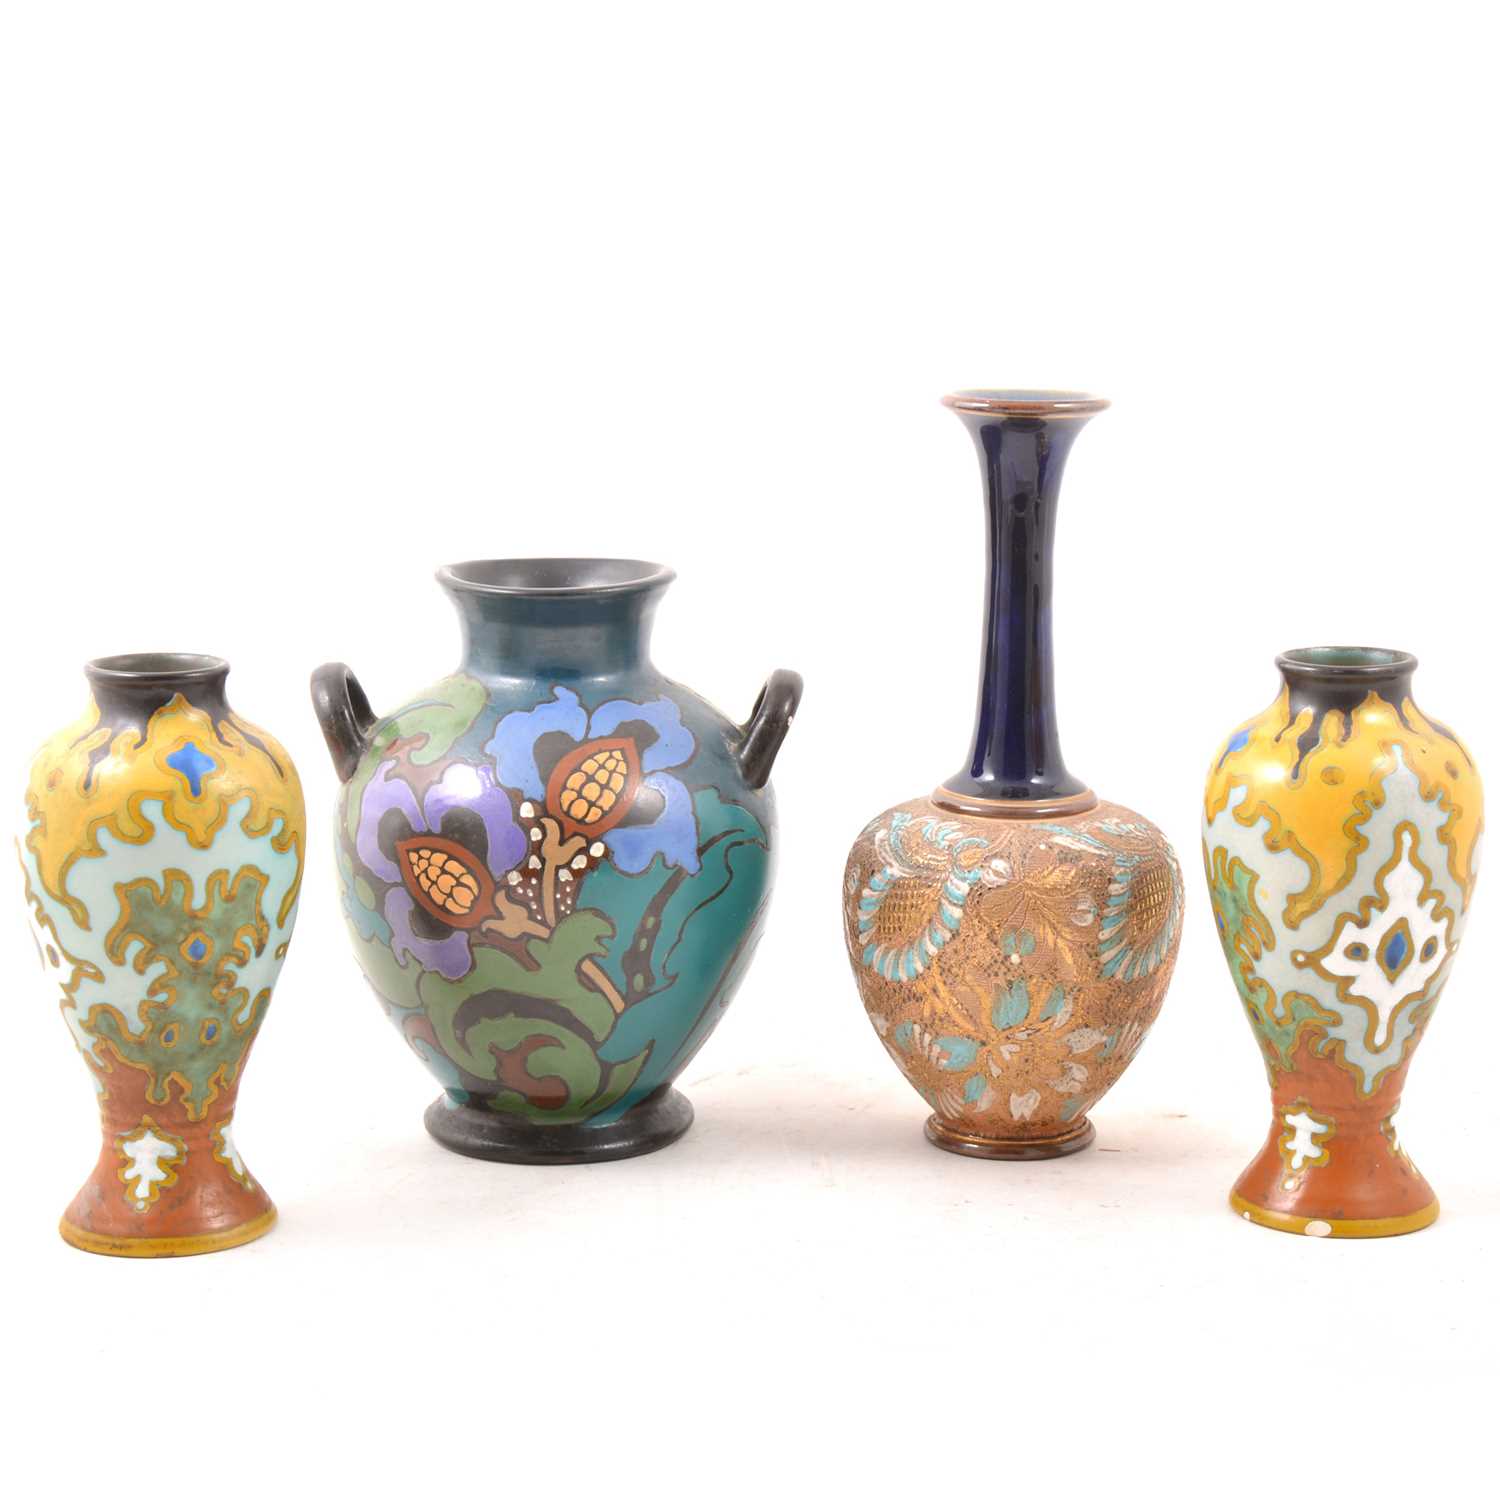 Lot 33 - Doulton Lambeth Slaters stoneware vase, and three other pottery vases.